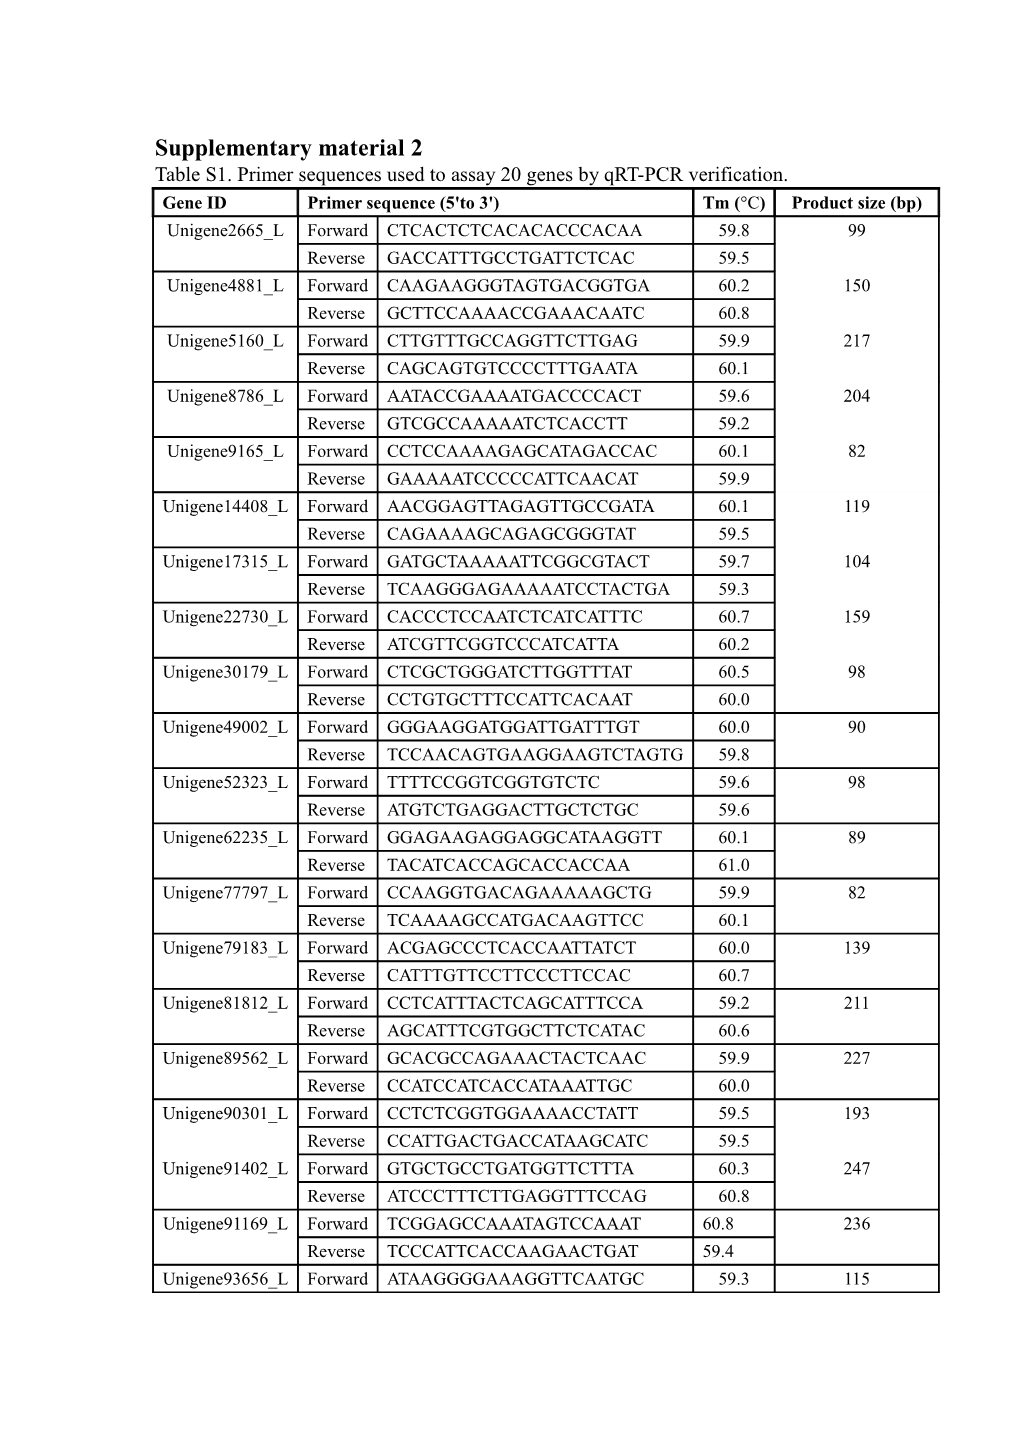 Table S1. Primer Sequences Used to Assay 20Genes by Qrt-Pcrverification